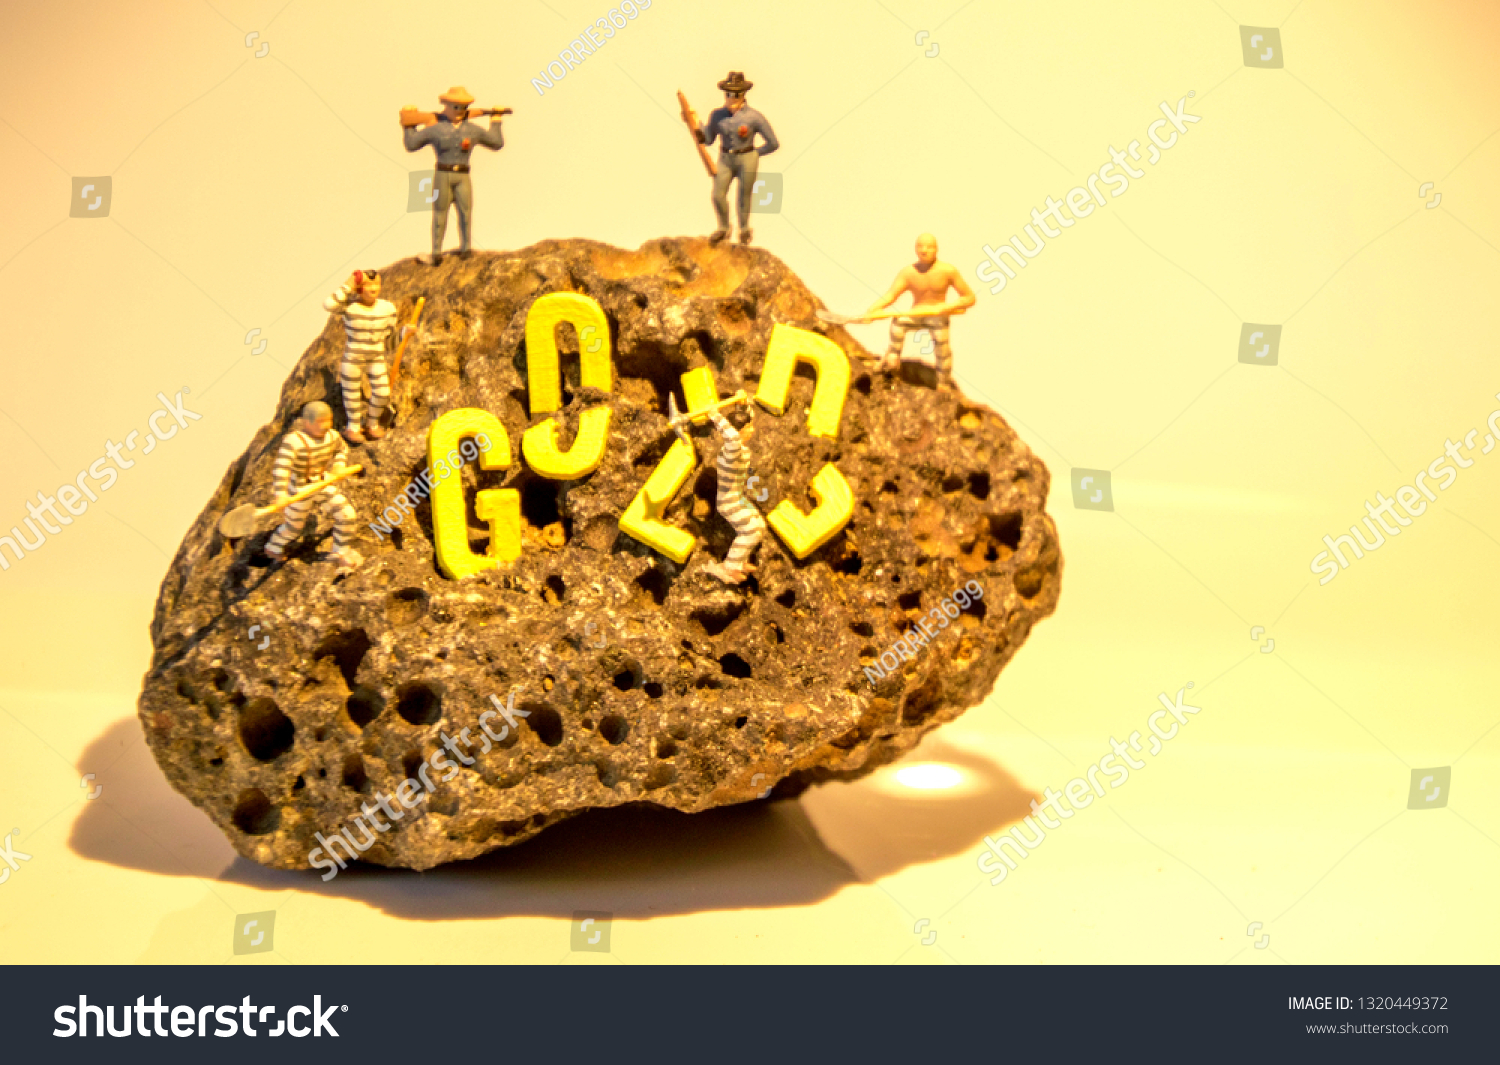 The word Gold on a rock surface to show the findings of any item really whether it be historic, treasure or for fun. #1320449372